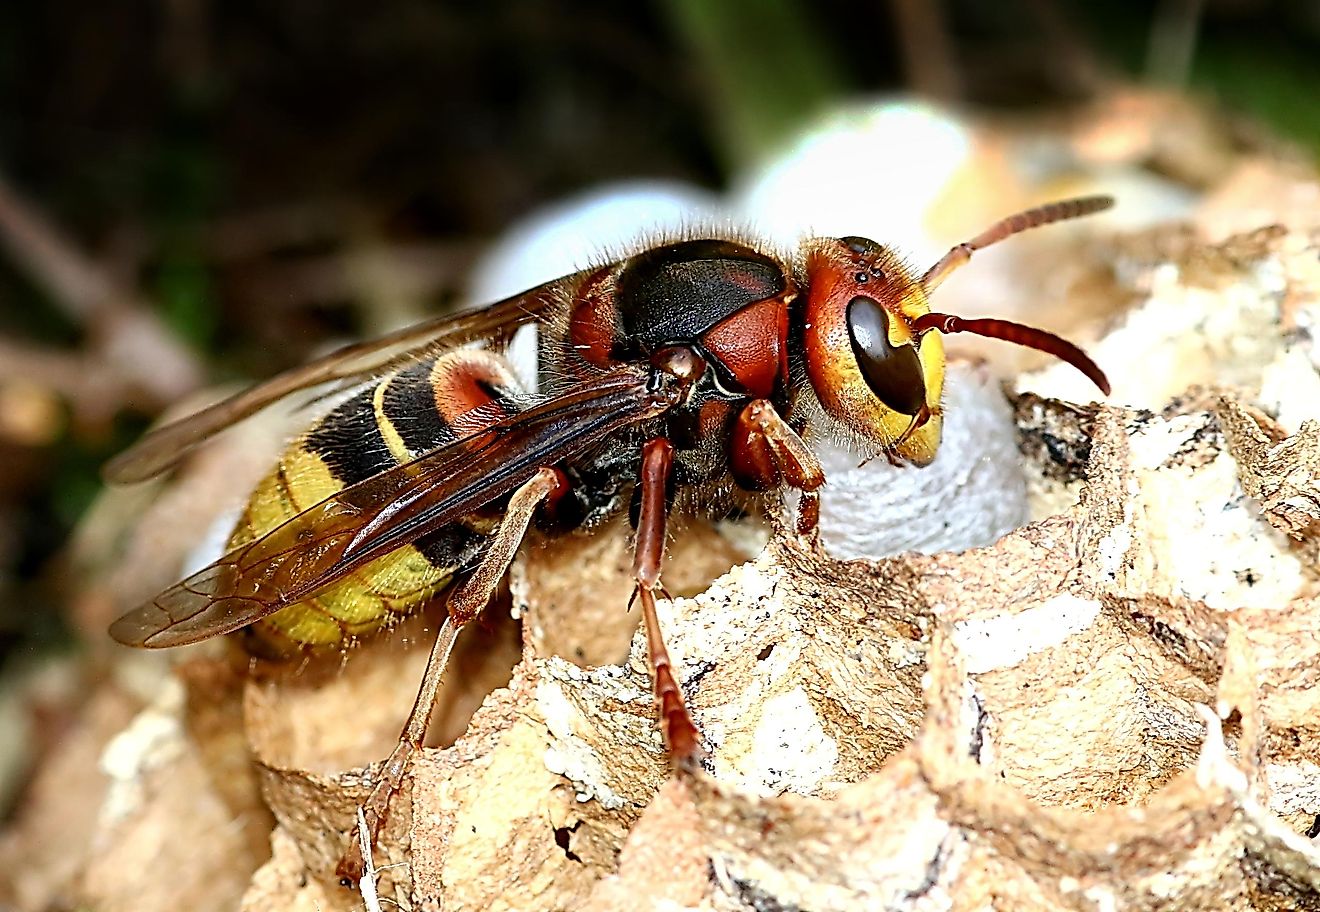 Also known as the Vespa crabro, it is the only true hornet species that can be found in the continent of North America.